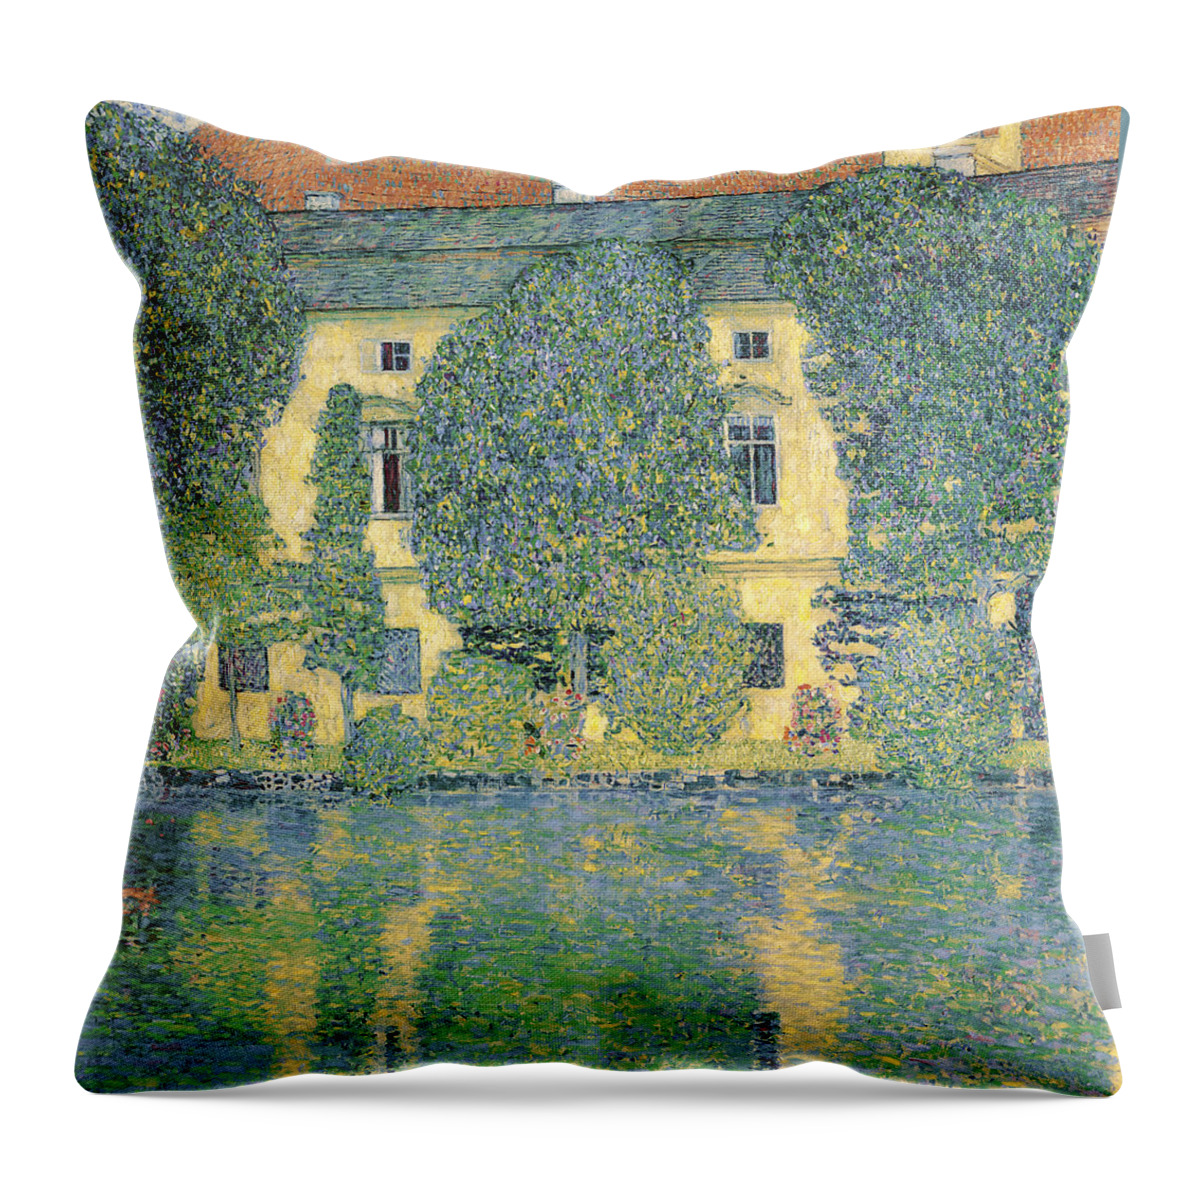 Gustav Klimt Throw Pillow featuring the painting The Schloss Kammer On The Attersee IIi #1 by Celestial Images